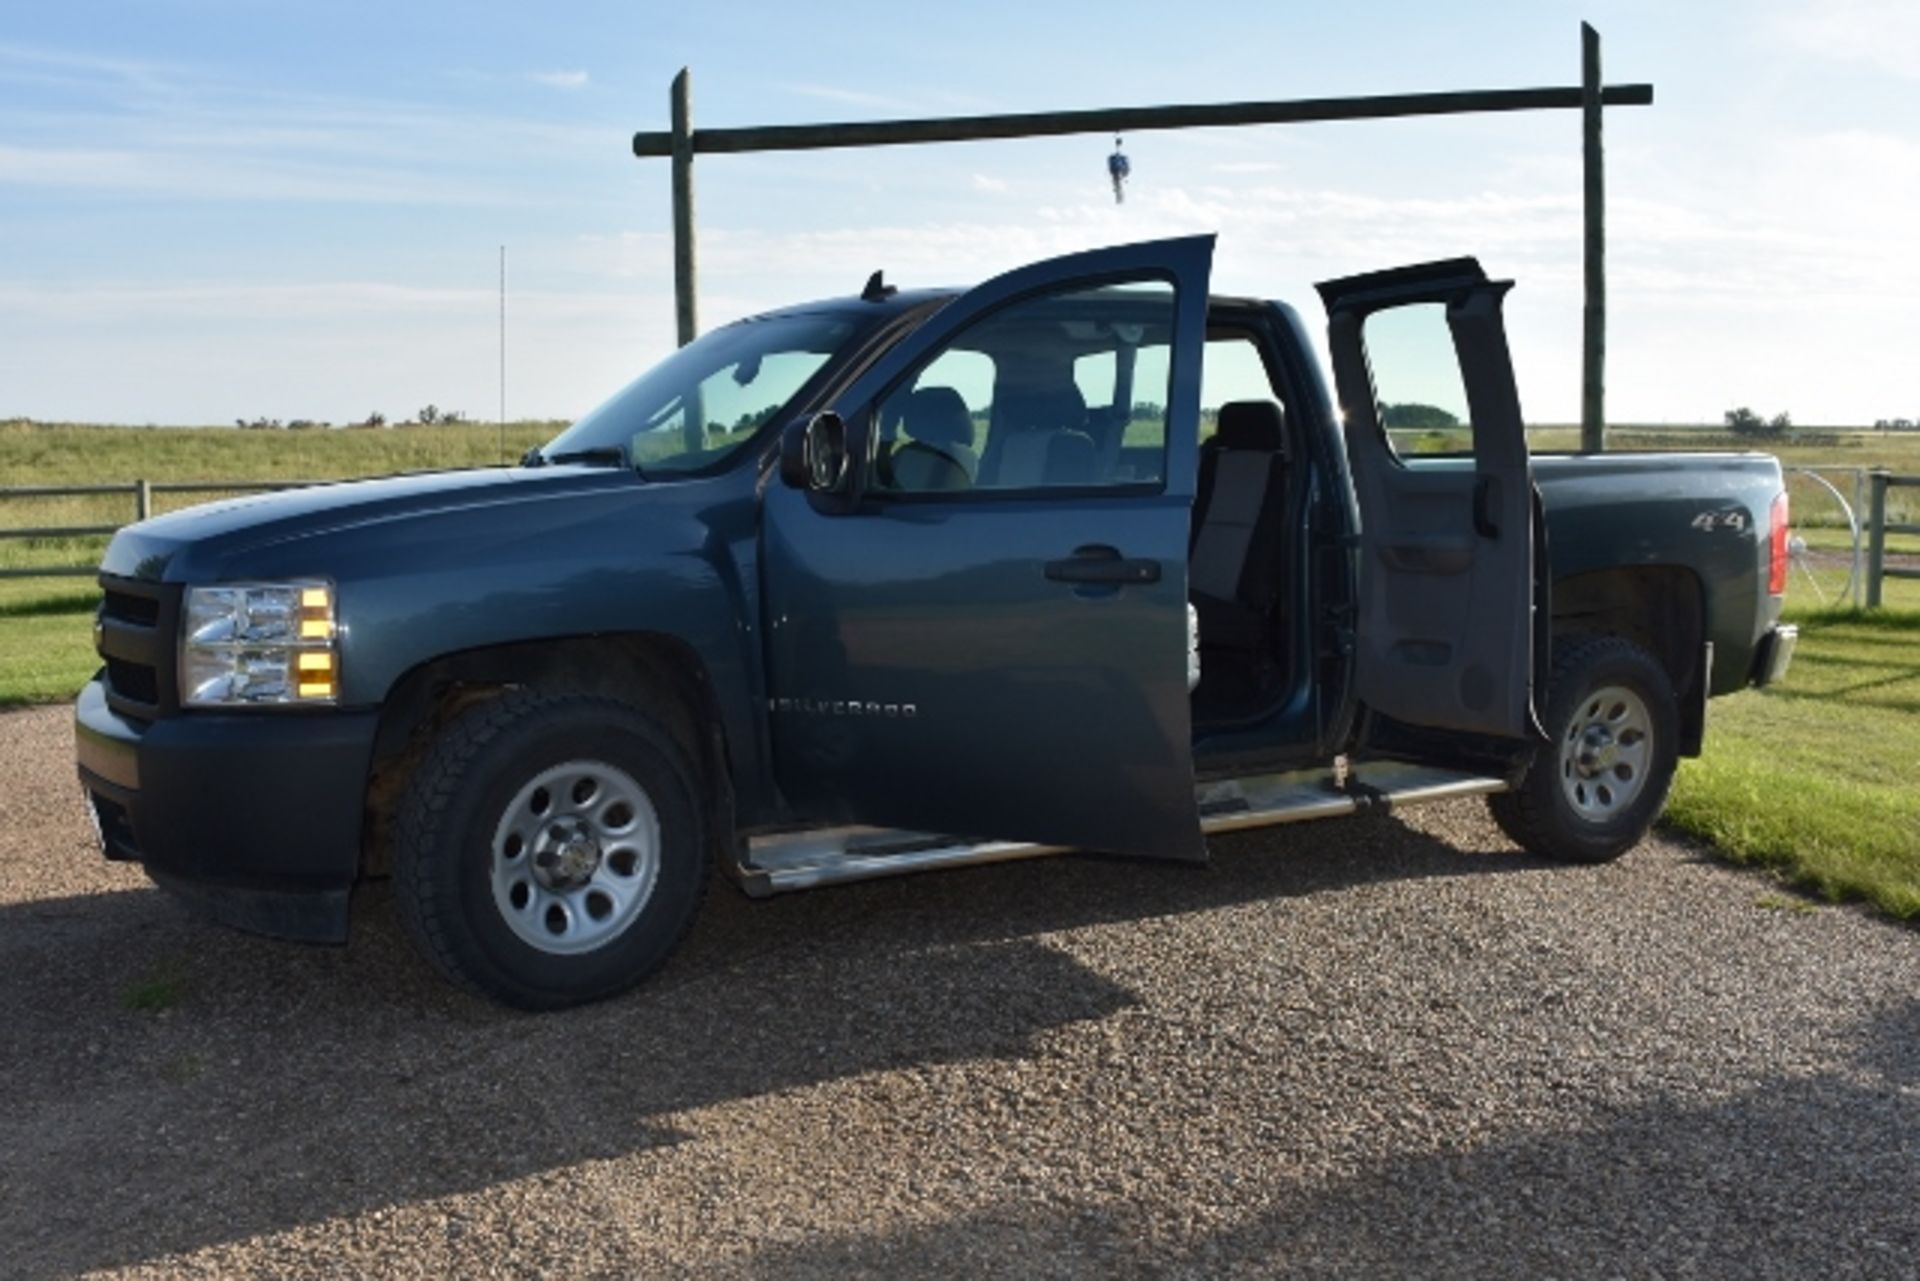 2008 Chevy Silverado 1500, 1/2 Ton, 4 x 4, 5.3L, Extended Cab, Approx. 60,000 kms - Image 2 of 3